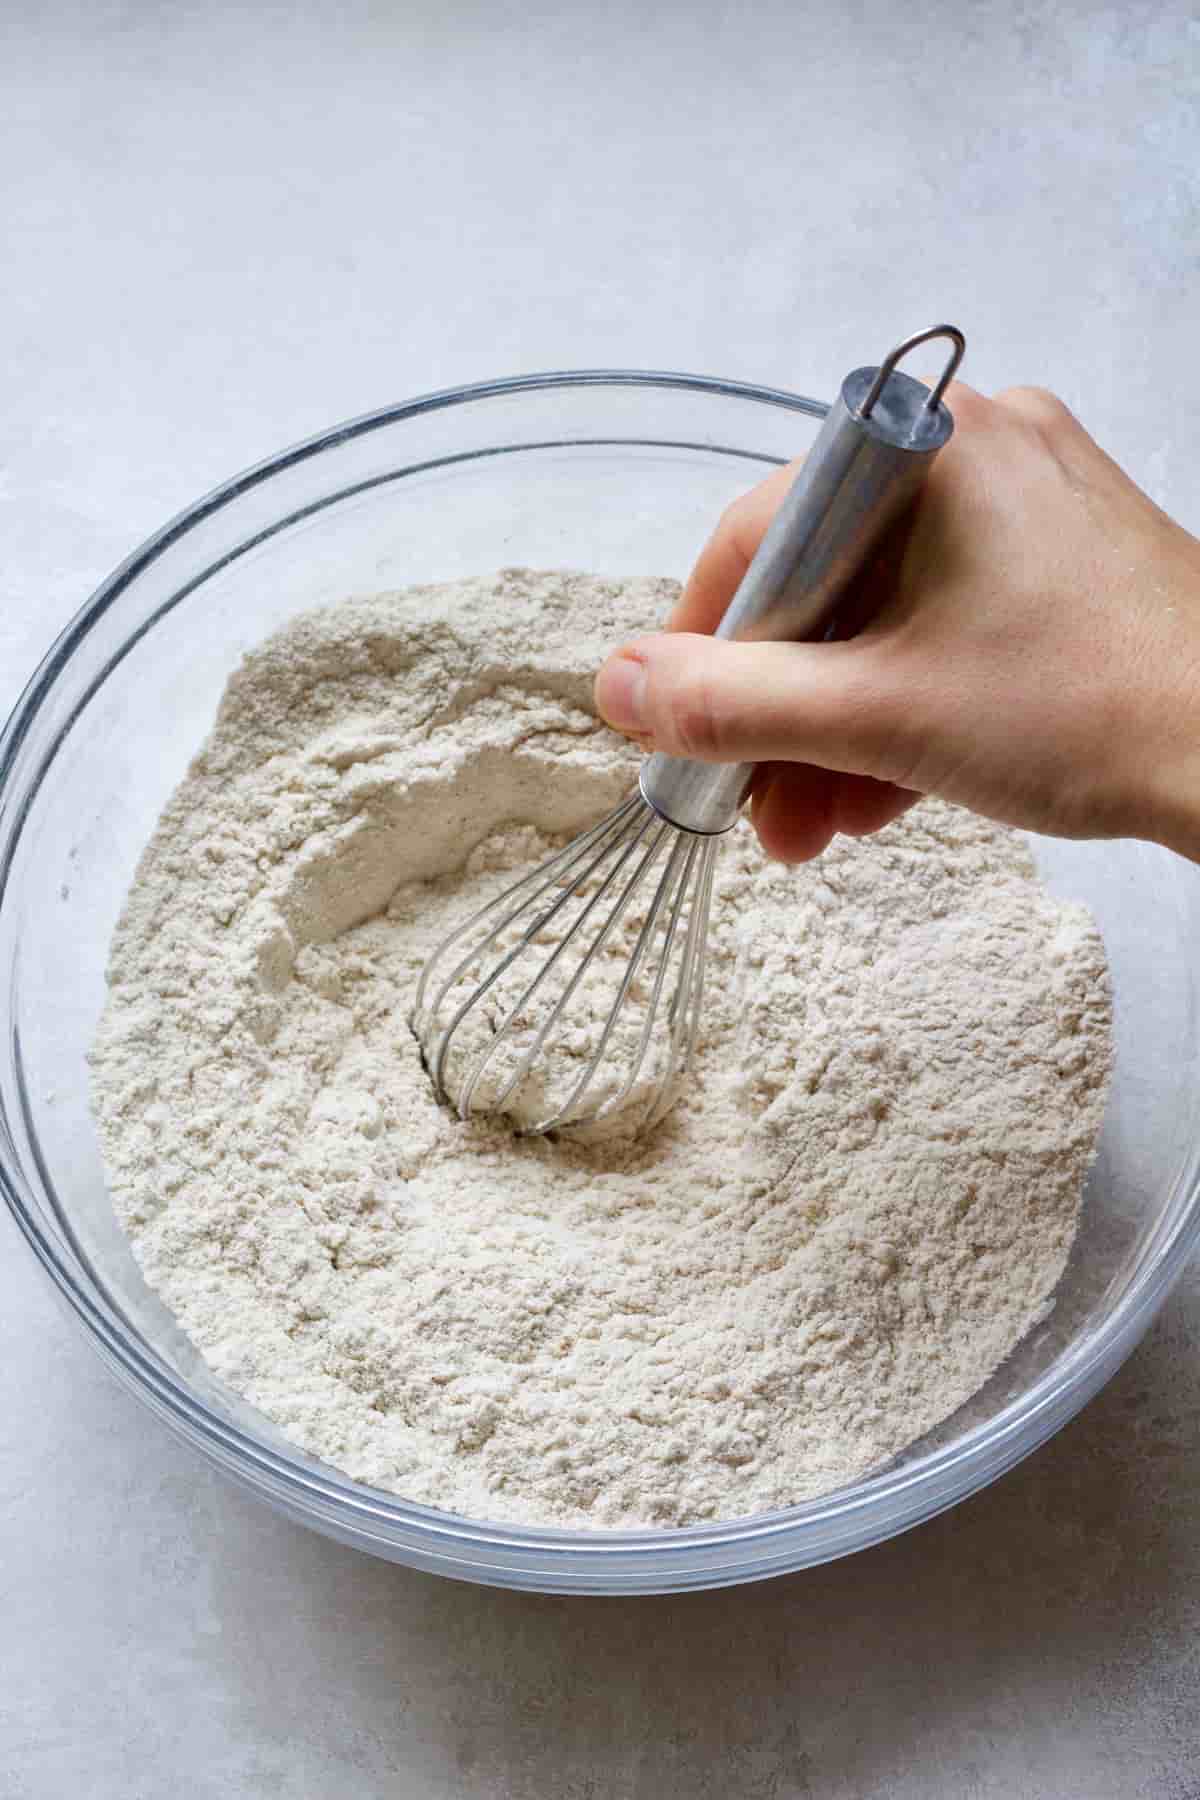 Hand mixing flour and spices in a bowl with a whisk.